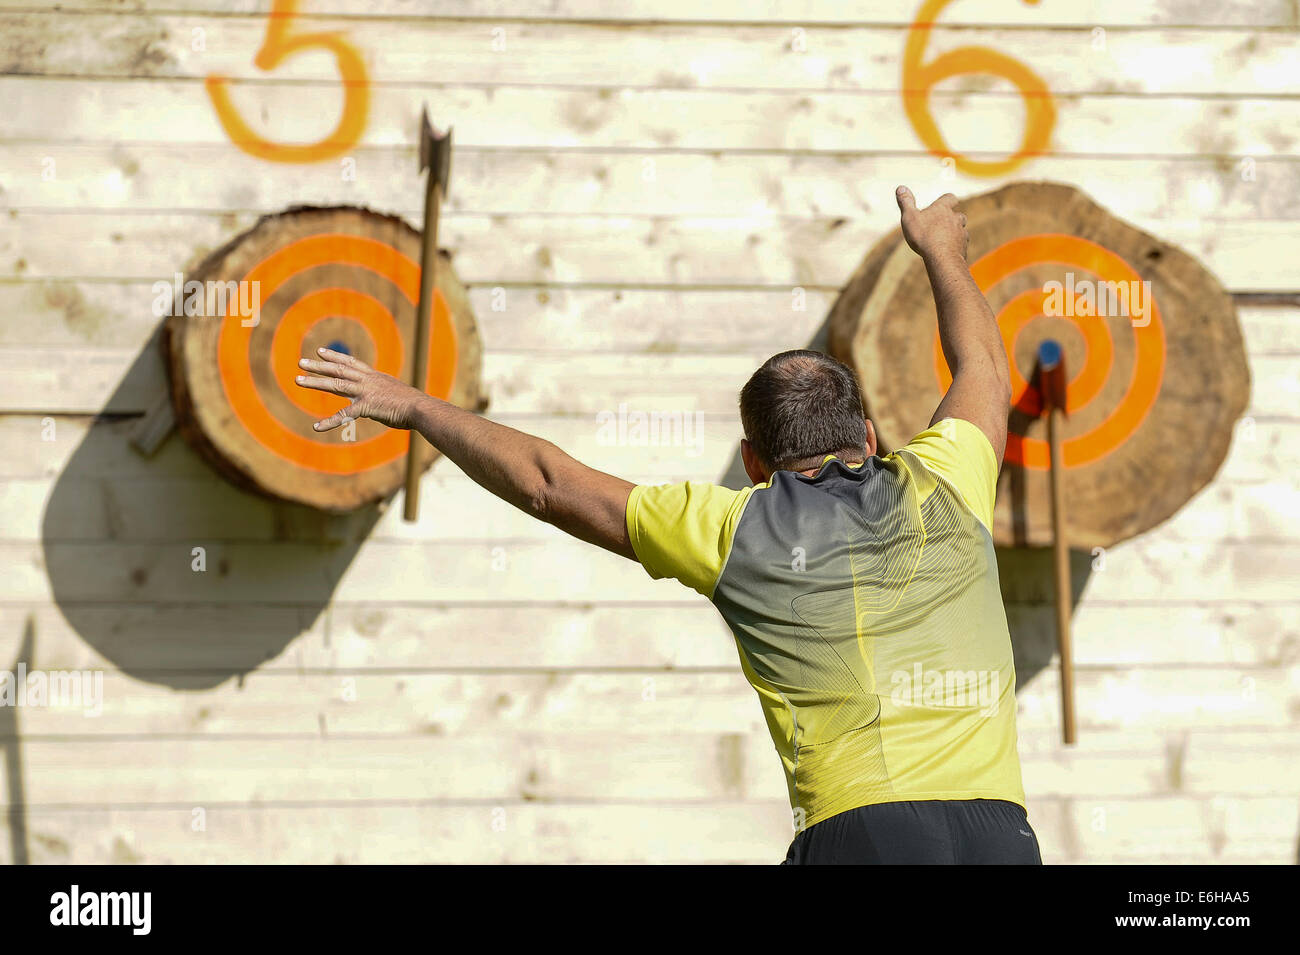 Maetaguse, Estonia. 23rd Aug, 2014. A player competes in the Nordic axe throwing championship in Maetaguse, Estonia, on Aug. 23, 2014. More than 100 best axe throwers from Denmark, Sweden, Finland and Estonia compete in the Nordic axe throwing championship, which lasts from 22 to 23 of August. © Sergei Stepanov/Xinhua/Alamy Live News Stock Photo